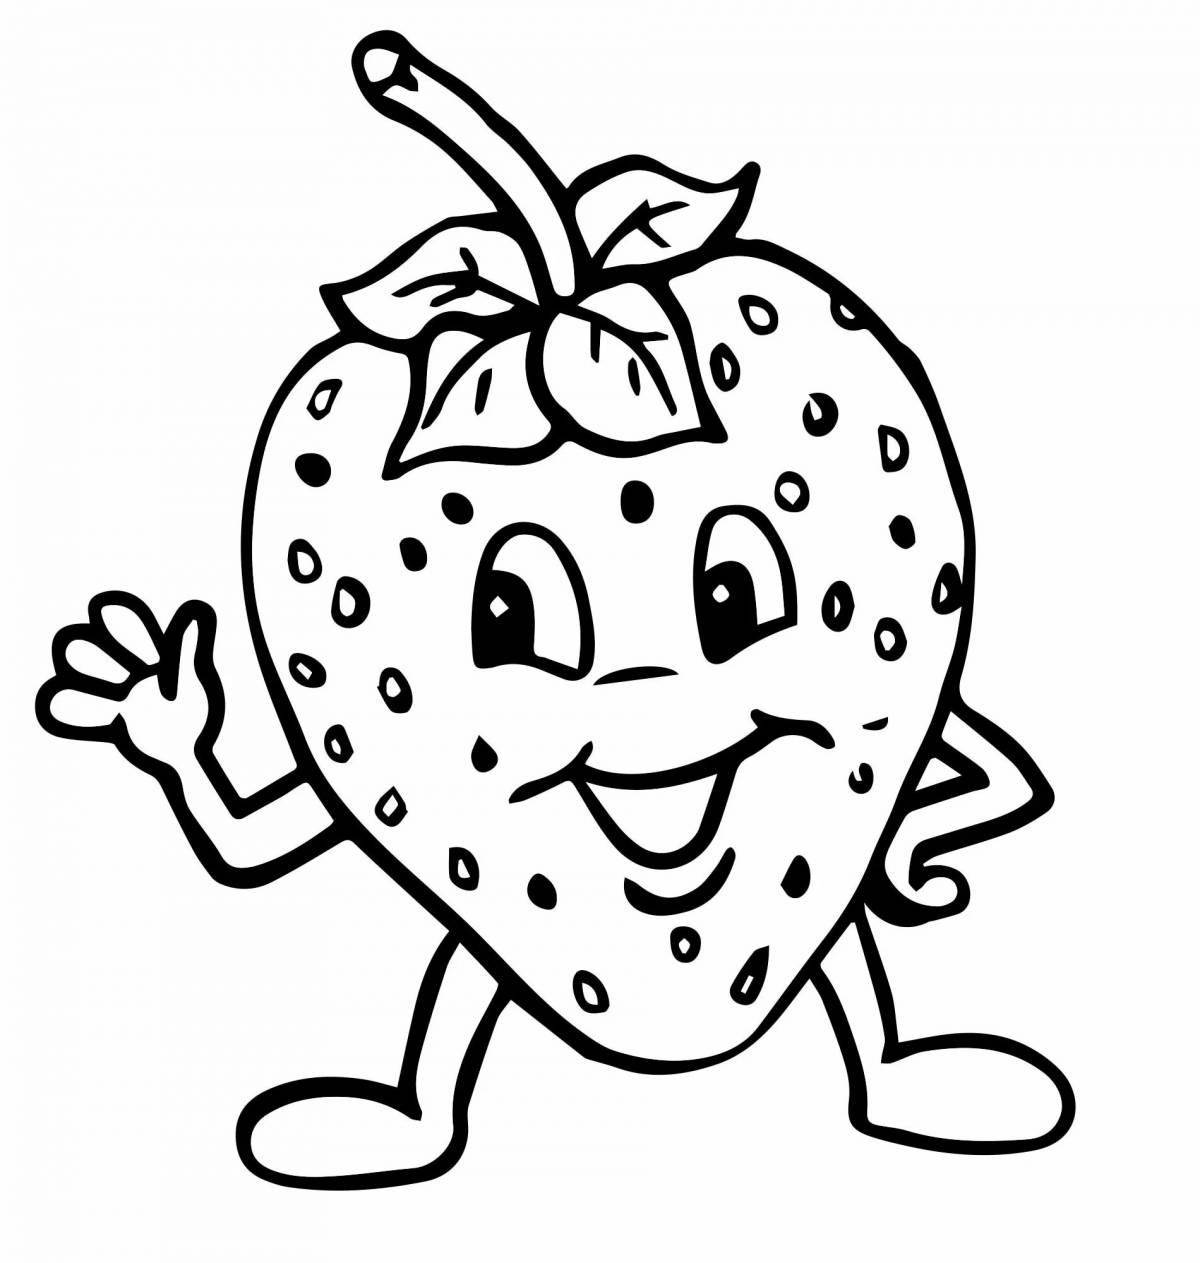 Exciting strawberry coloring book for kids